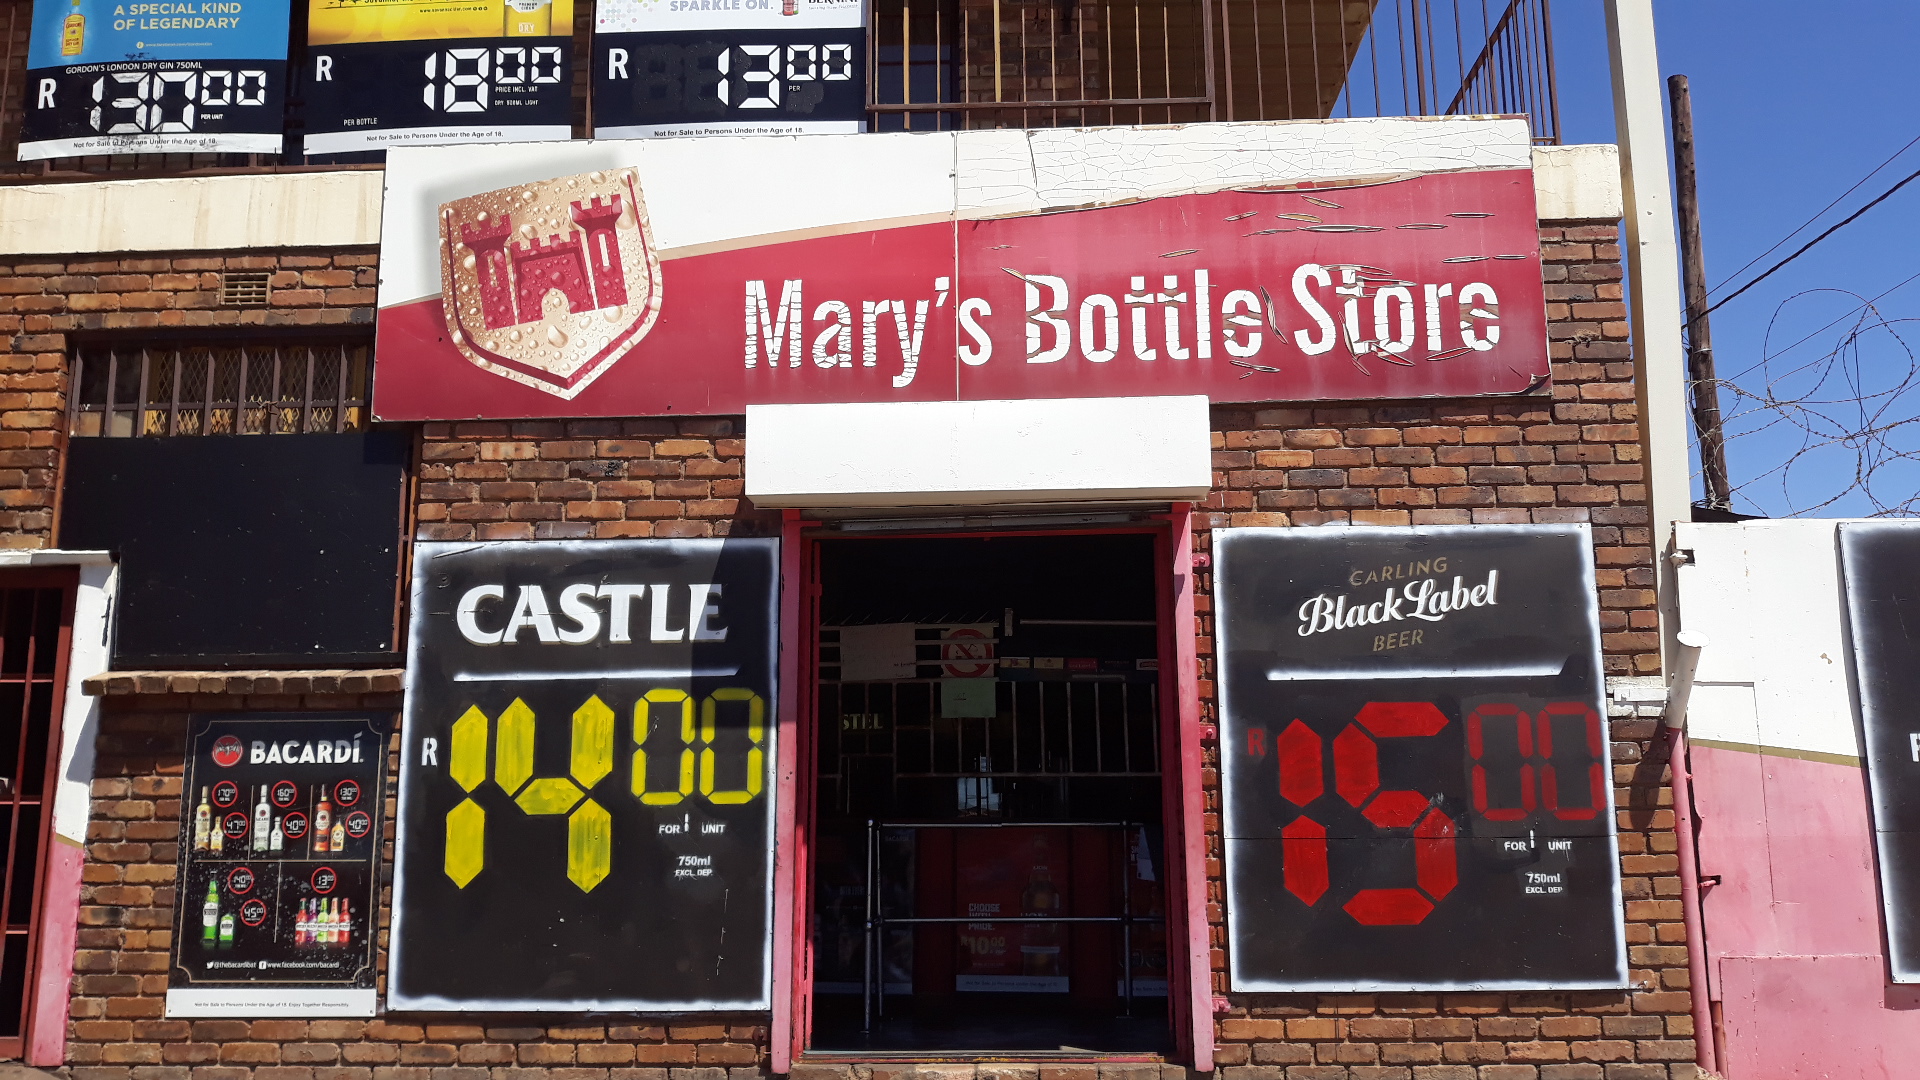 Mary’s Bottle Store